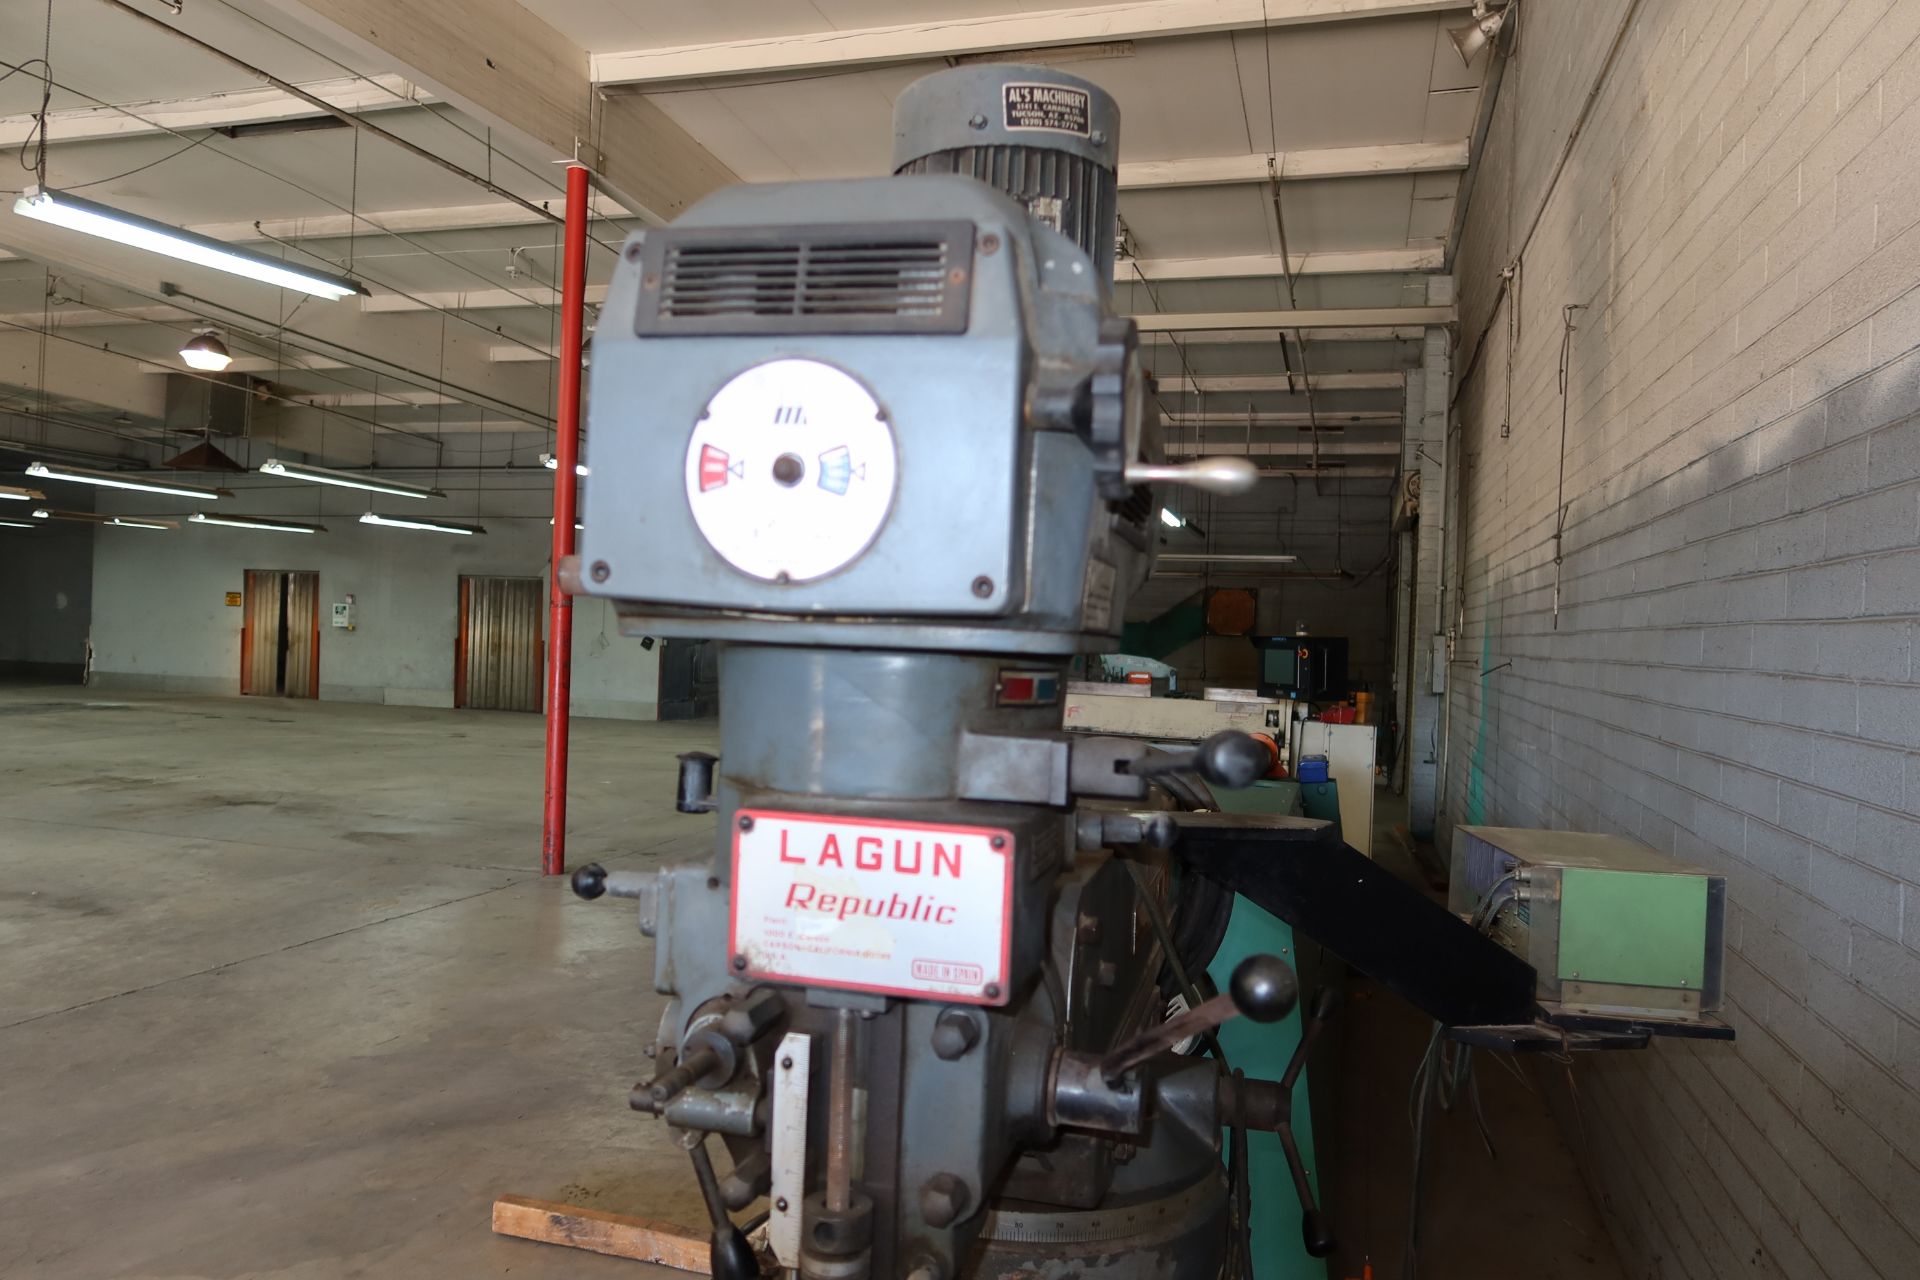 LAGUN VERTICAL MILL, POWER TABLE & KNEE, 50" X 10" TABLE, 2-AXIS DRO & MILL VISE, LOCATED: 3845 N. - Image 3 of 6